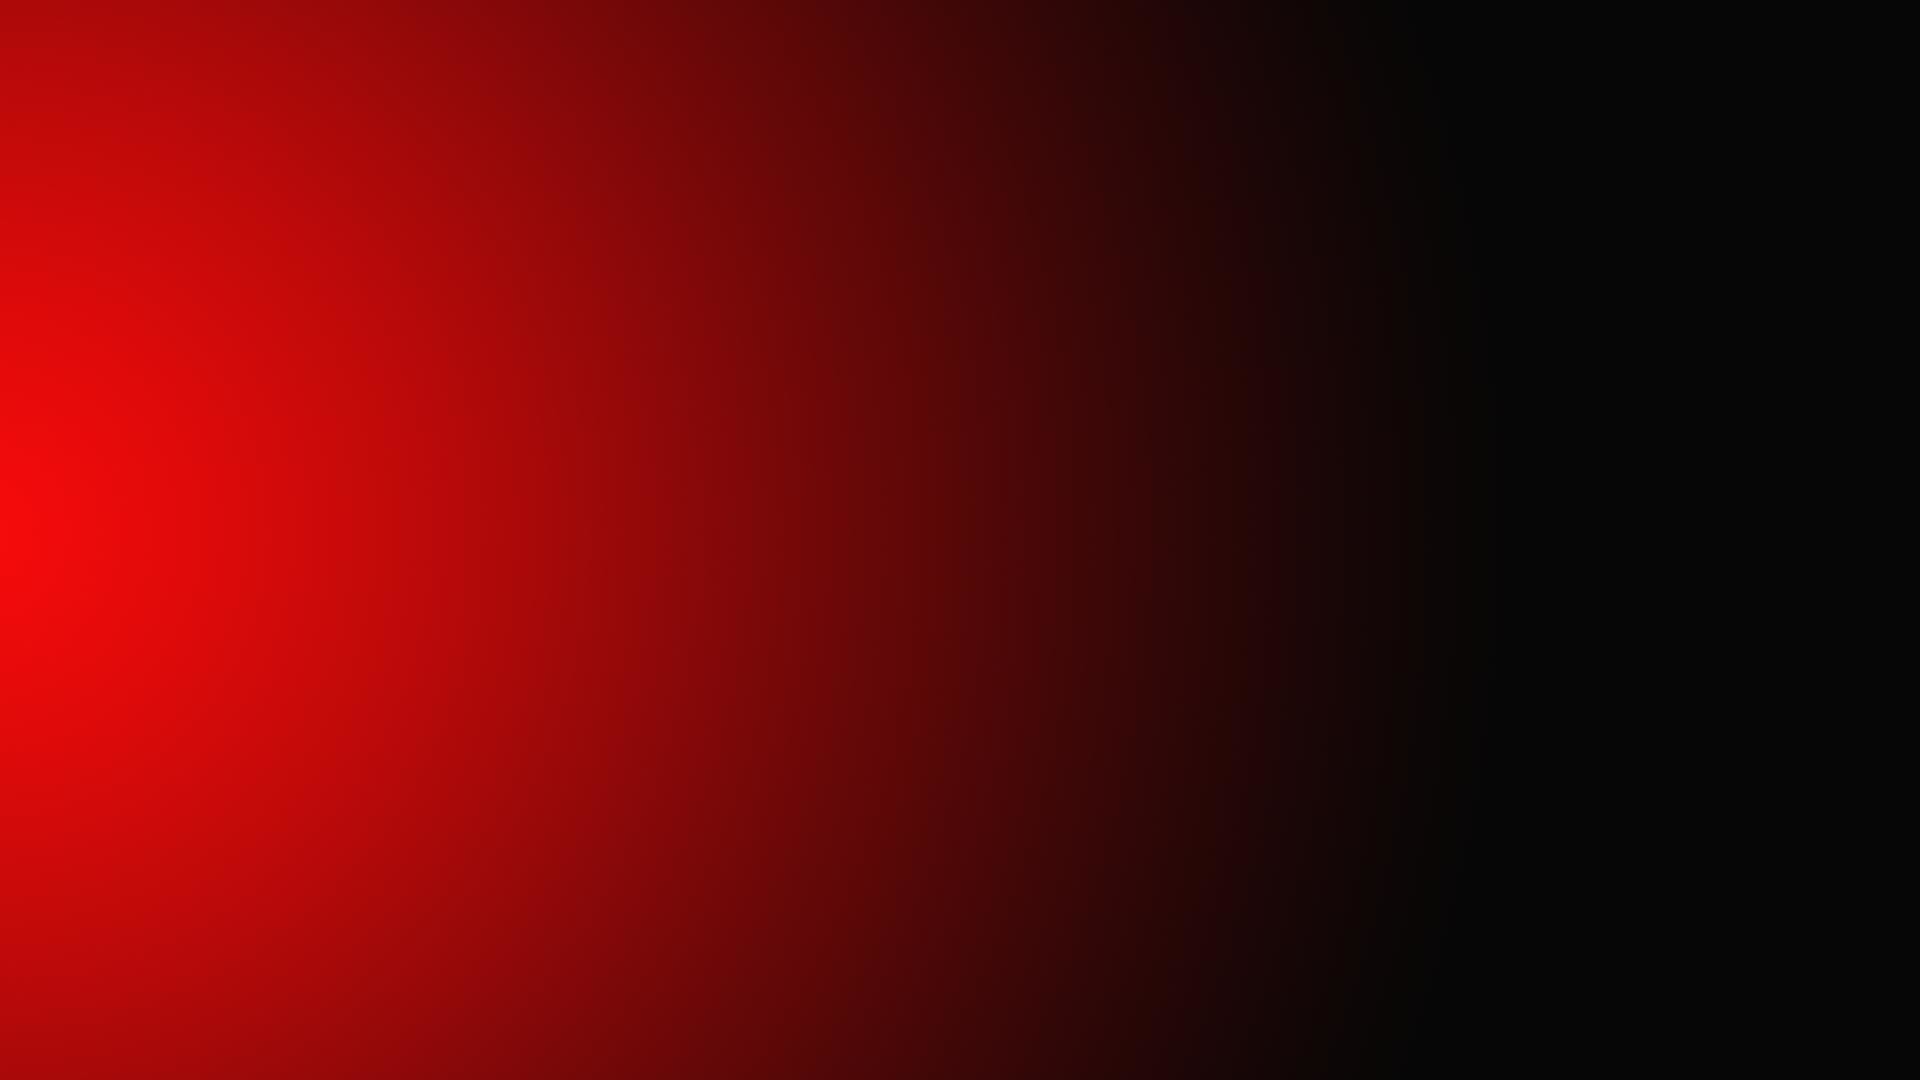 1920x1080 Desktop-hd-red-and-black-wallpaper-for-walls